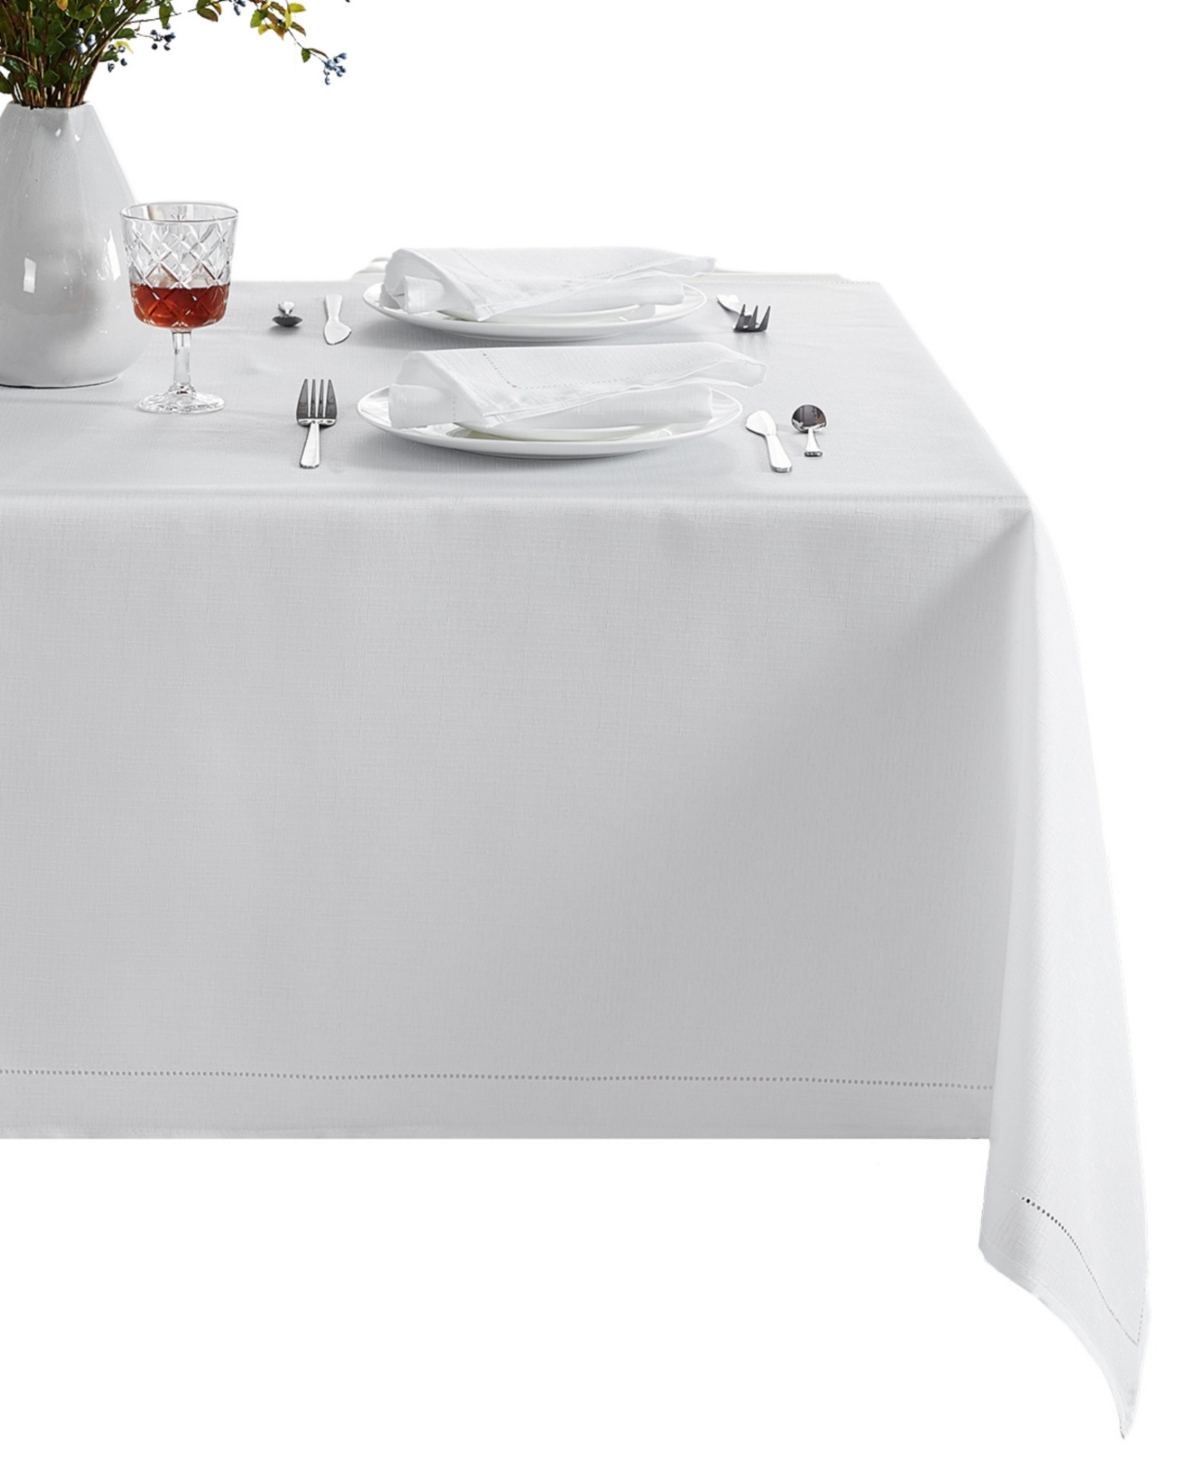 Elrene Alison Eyelet Punched Border Fabric Tablecloth, 52" X 70" In White